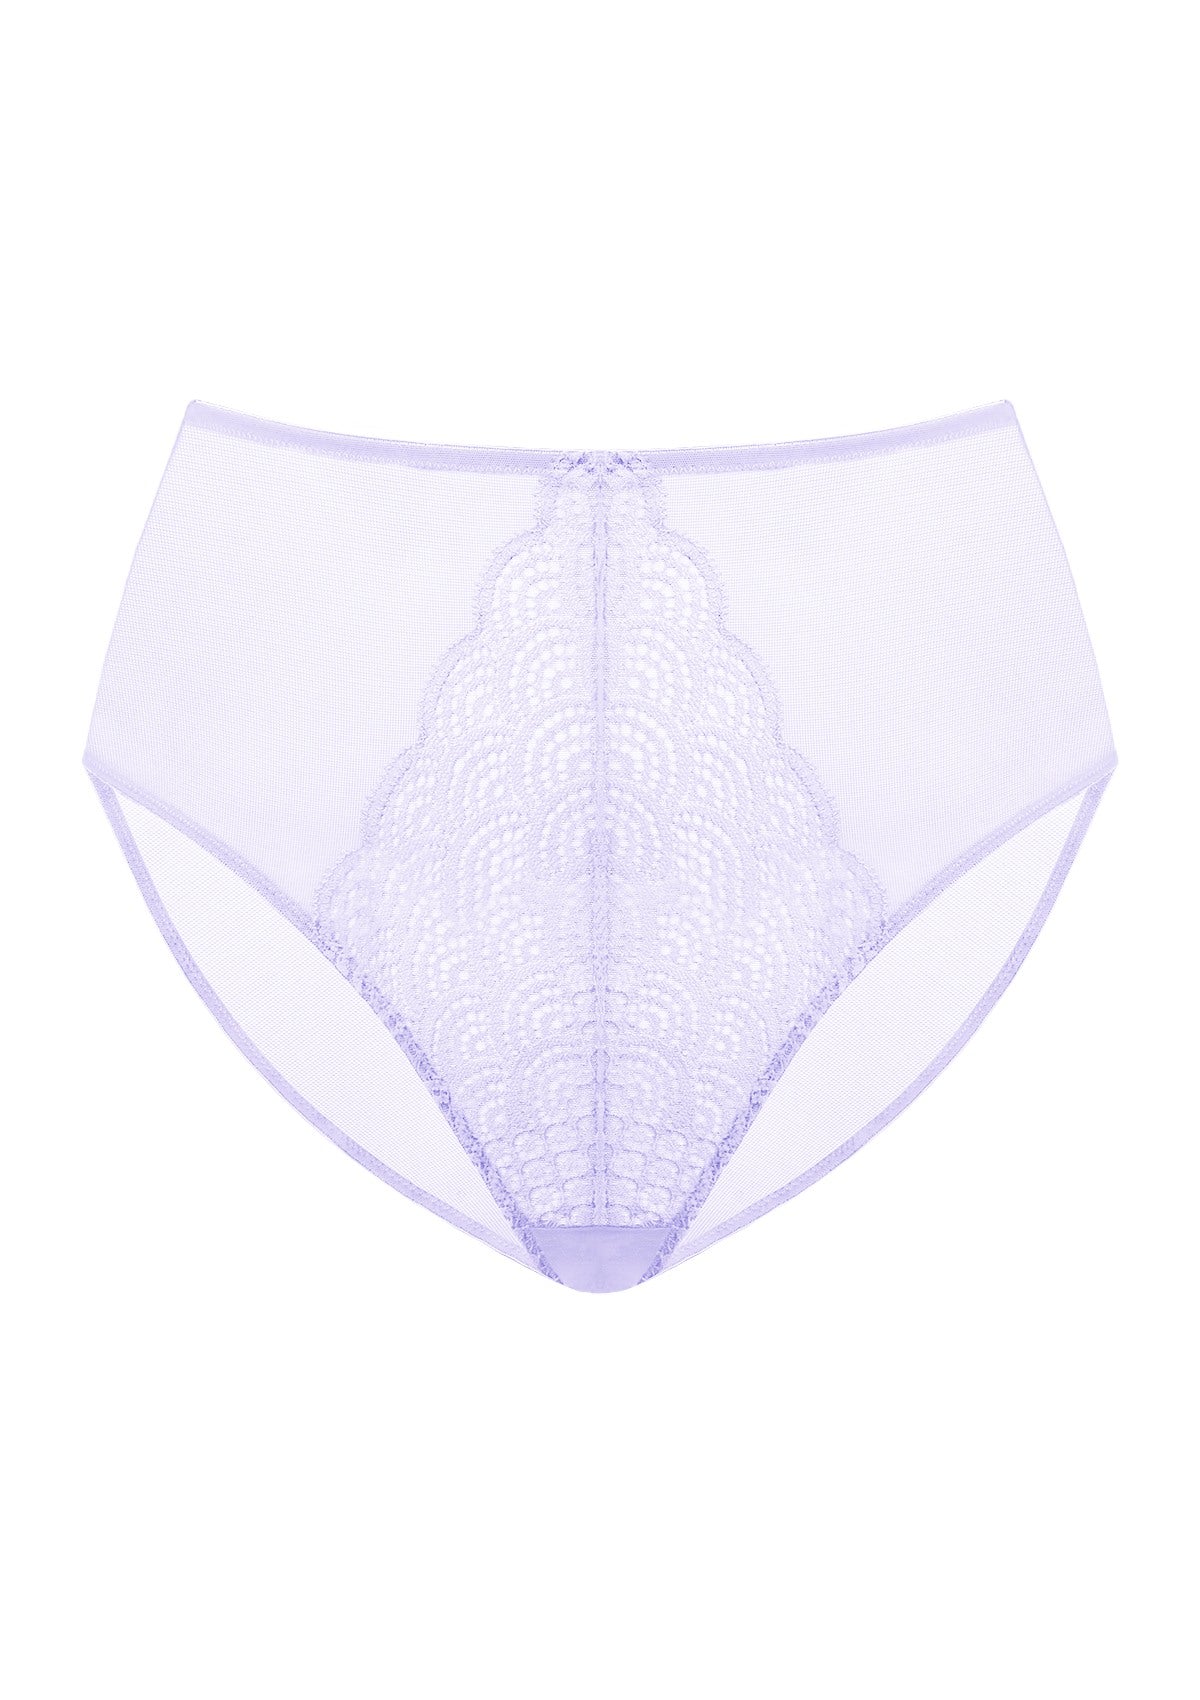 HSIA Spring Romance High-Rise Floral Lacy Panty-Comfort In Style - M / Light Purple